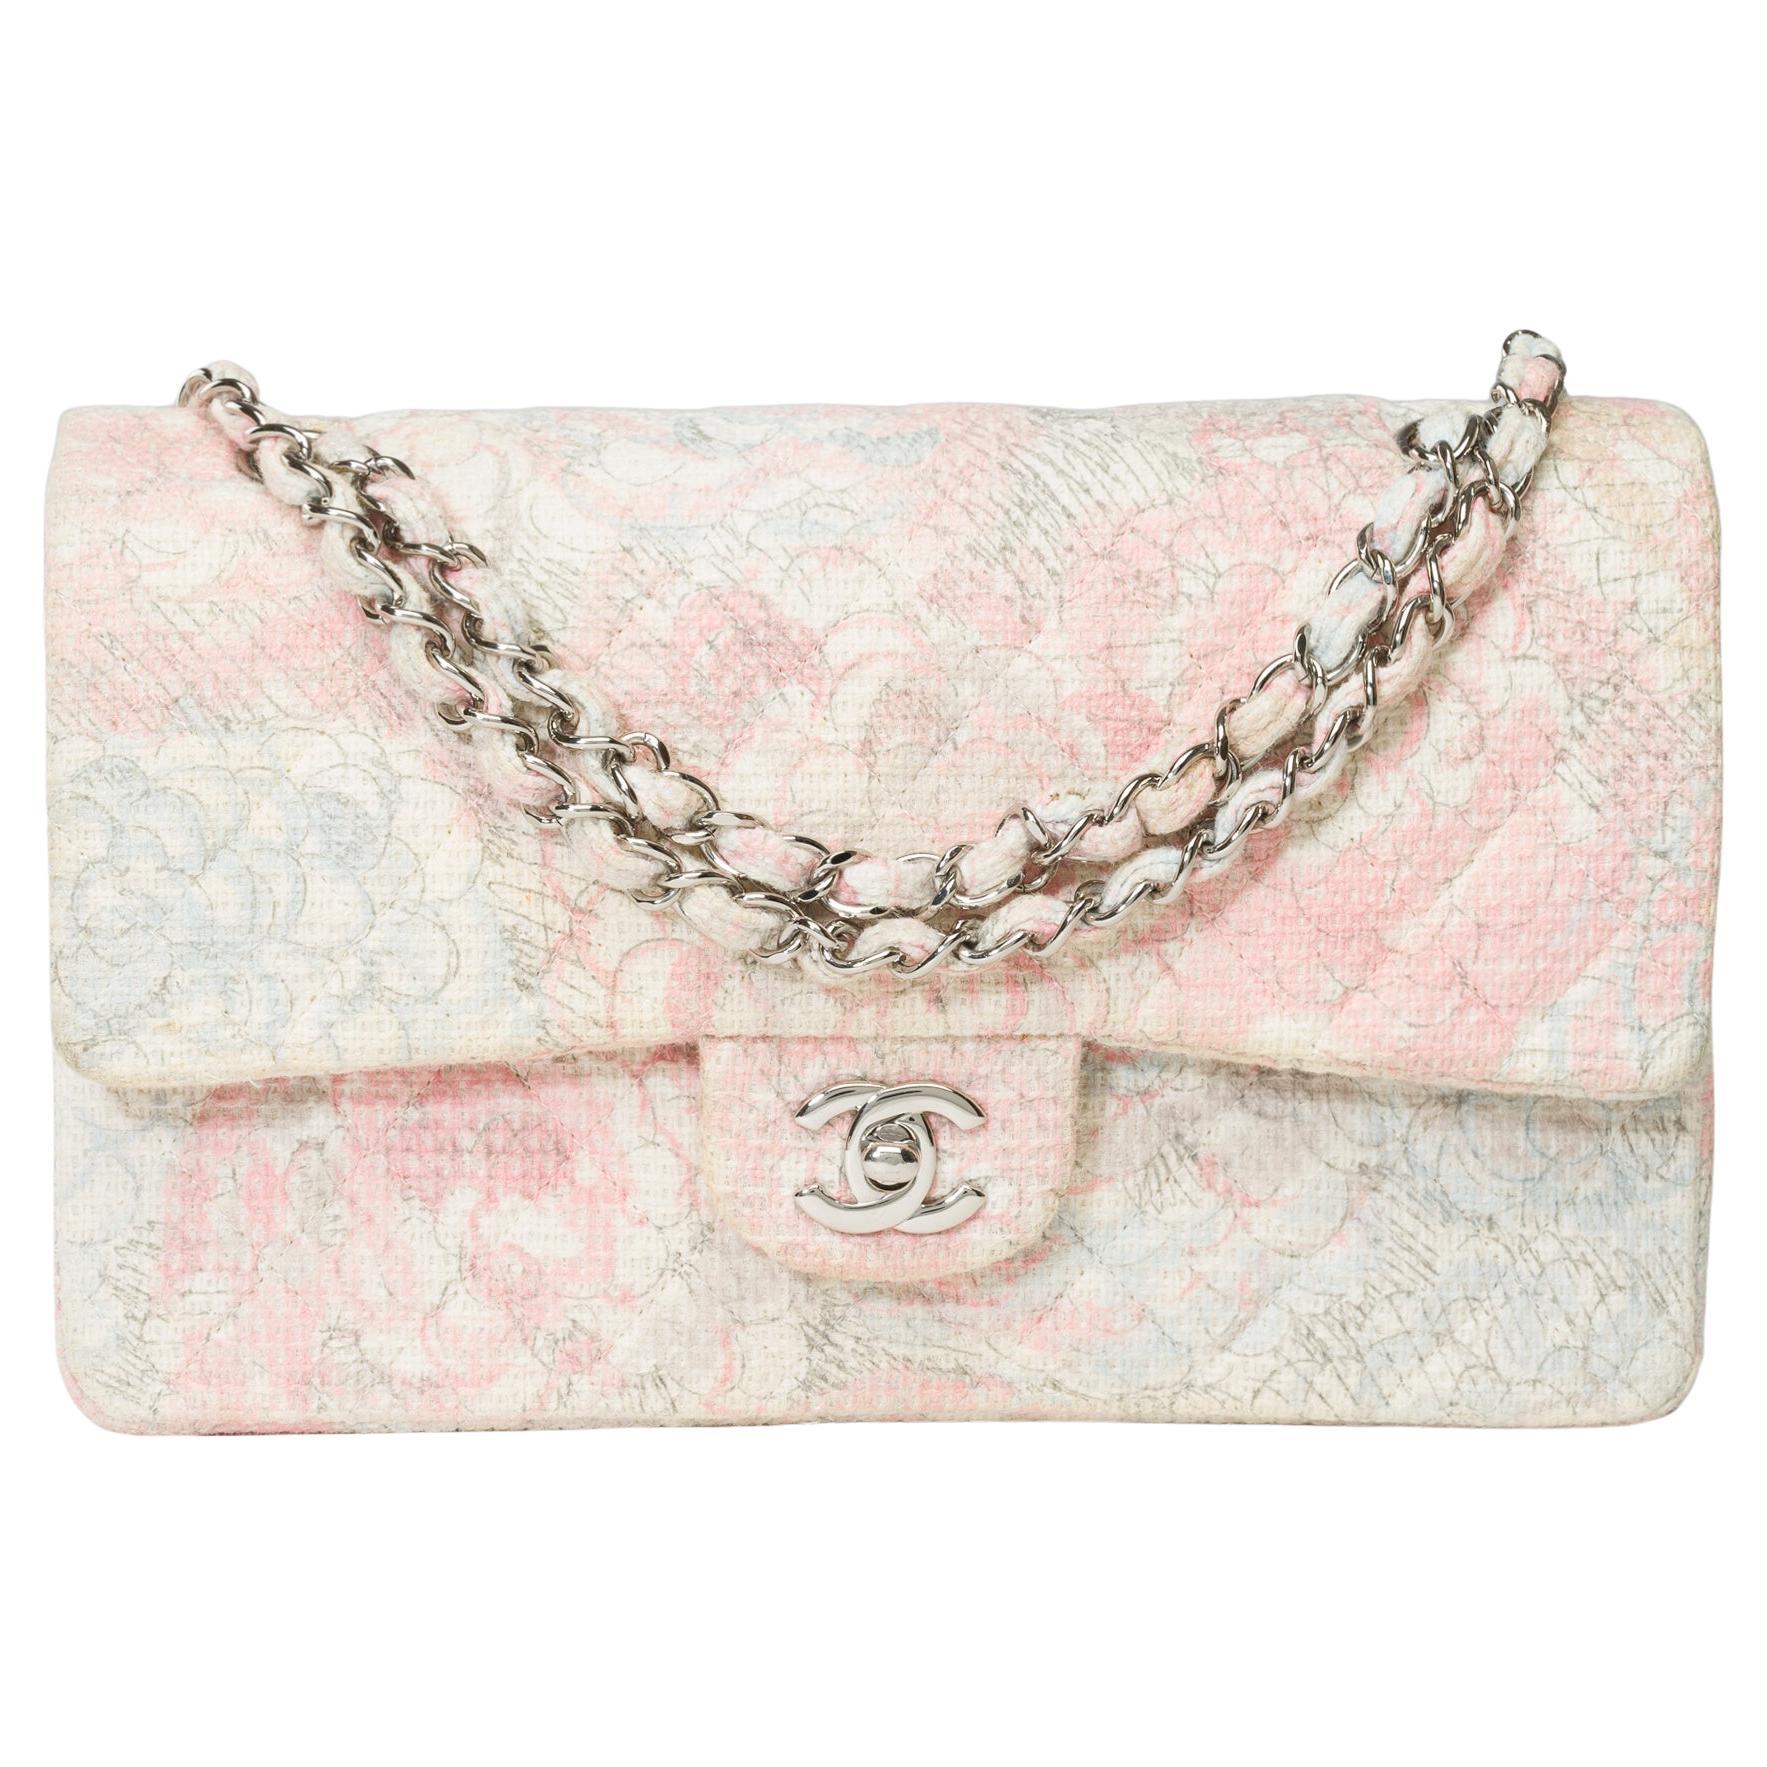 Rare Camelia Limited Edition Chanel Timeless Medium Shoulder bag in Tweed, SHW For Sale